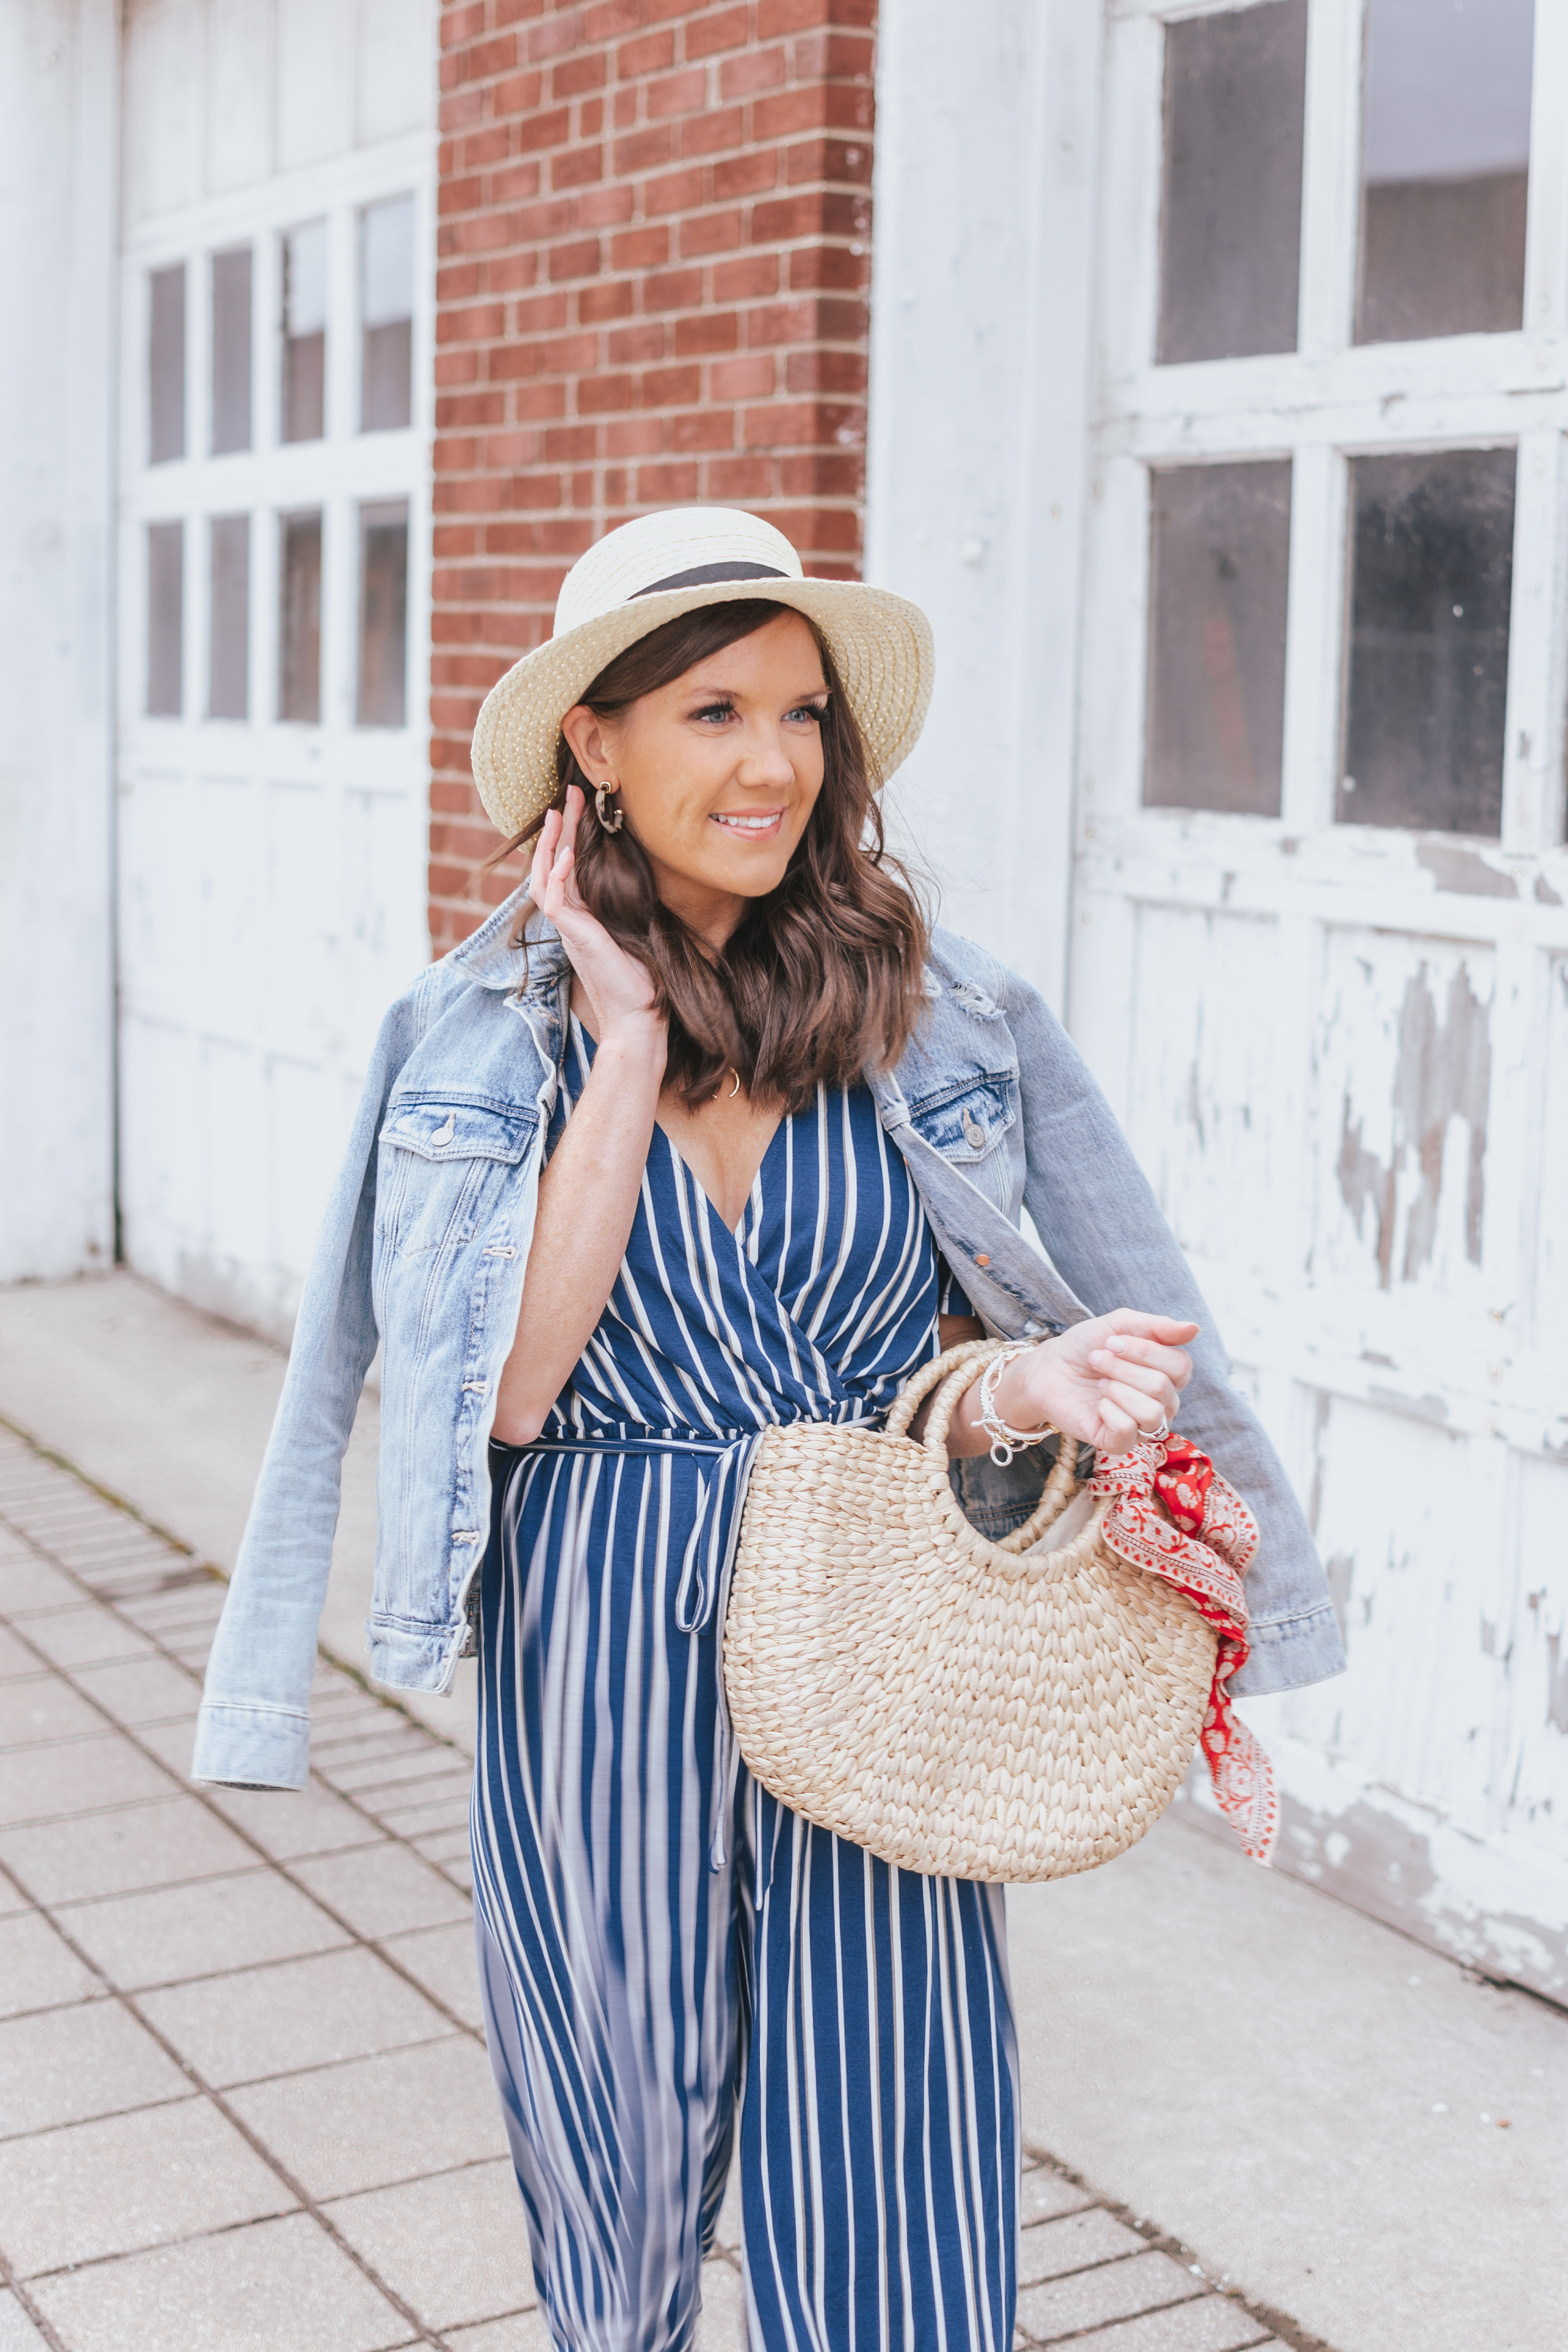 Styling a Wide Leg Jumpsuit, spring fashion at Walmart fashion finds, navy striped jumpsuit, sam edelman dupes, affordable fashion, vacation outfit